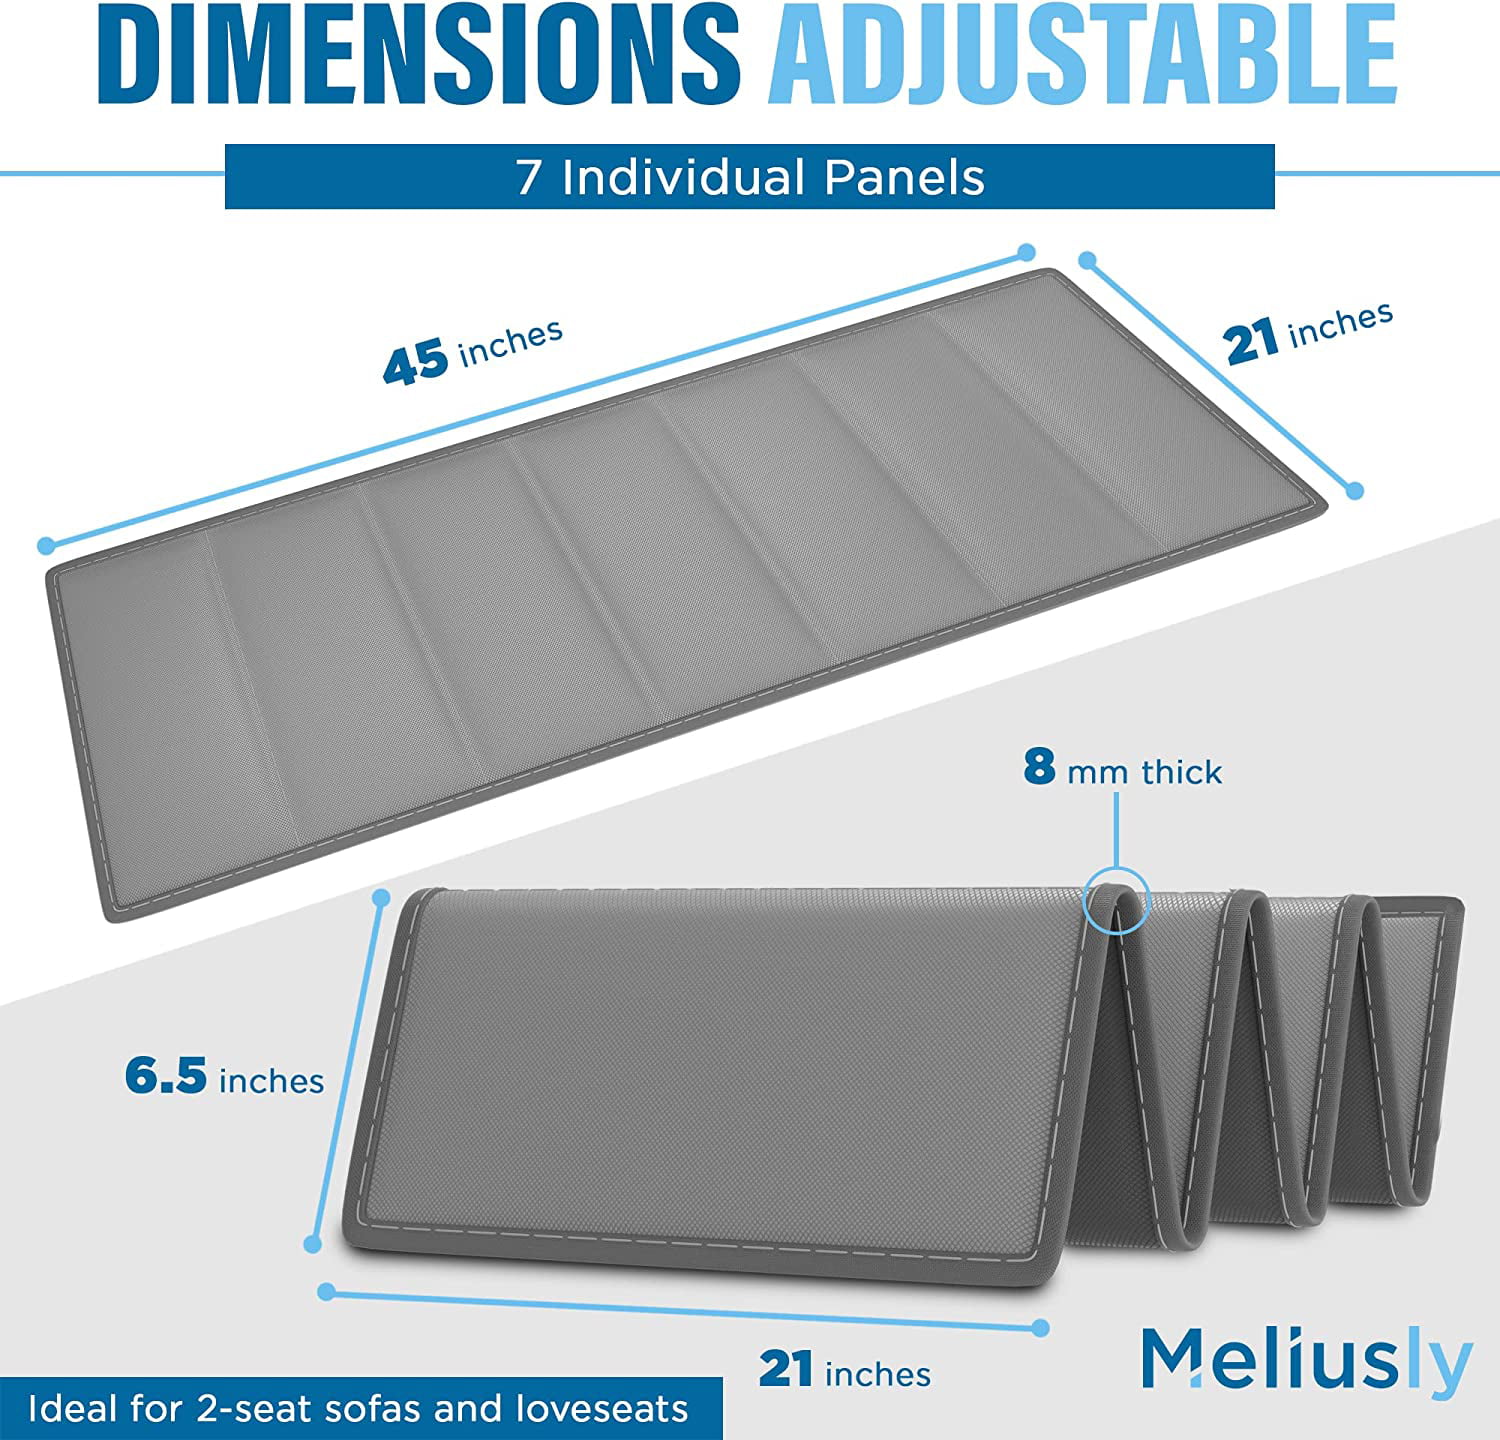 Meliusly® Sofa Cushion Support Board - Couch Support for Sagging